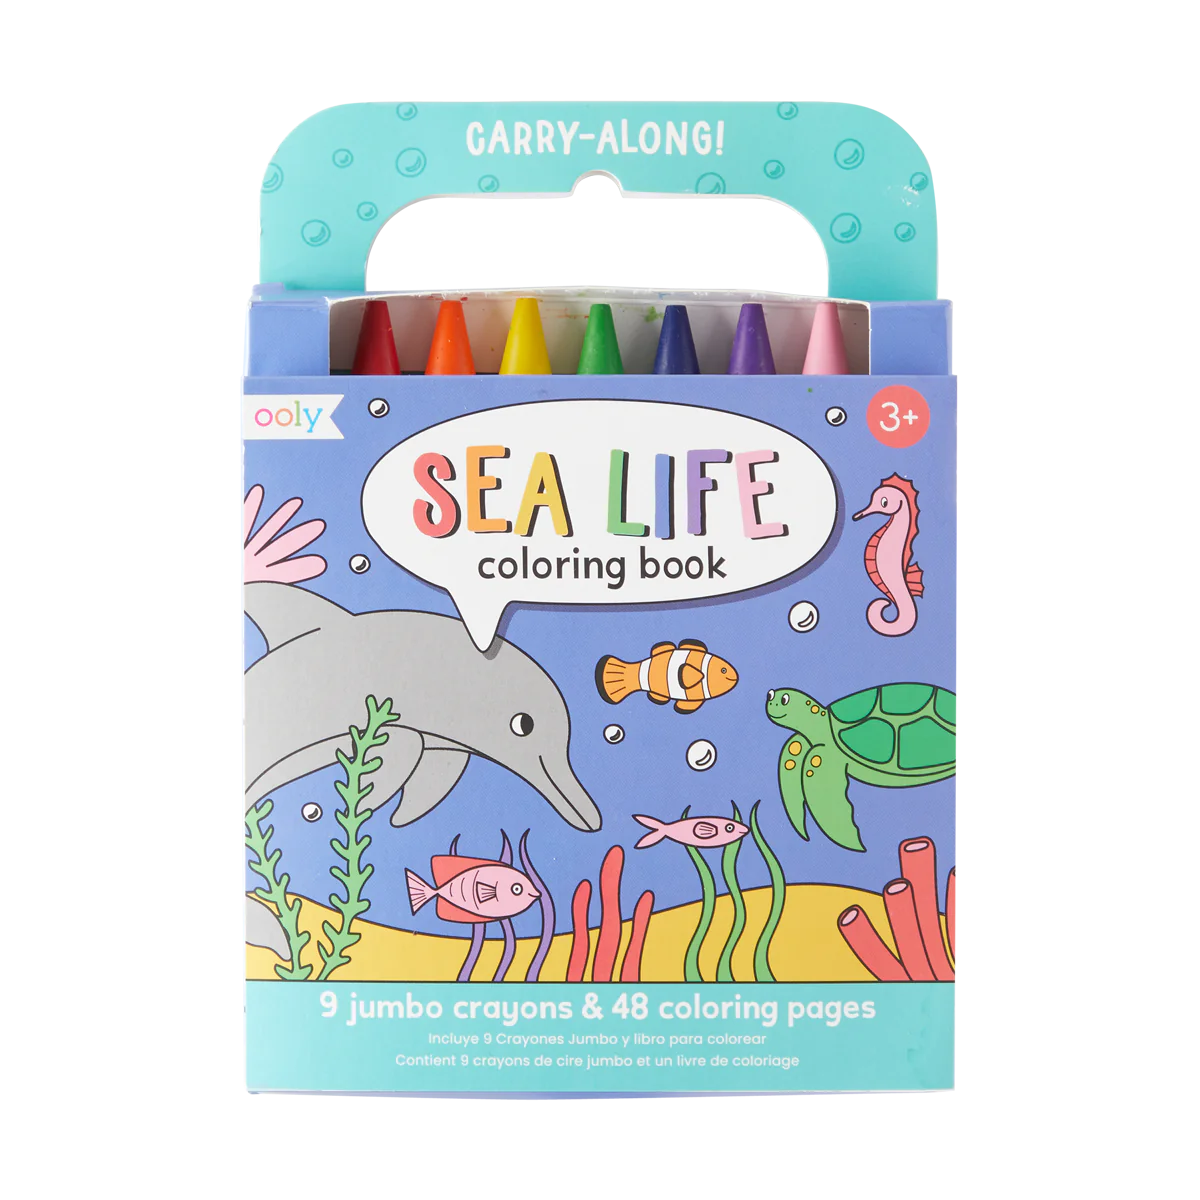 OOLY: CARRY ALONG COLORING BOOK SET - SEA LIFE